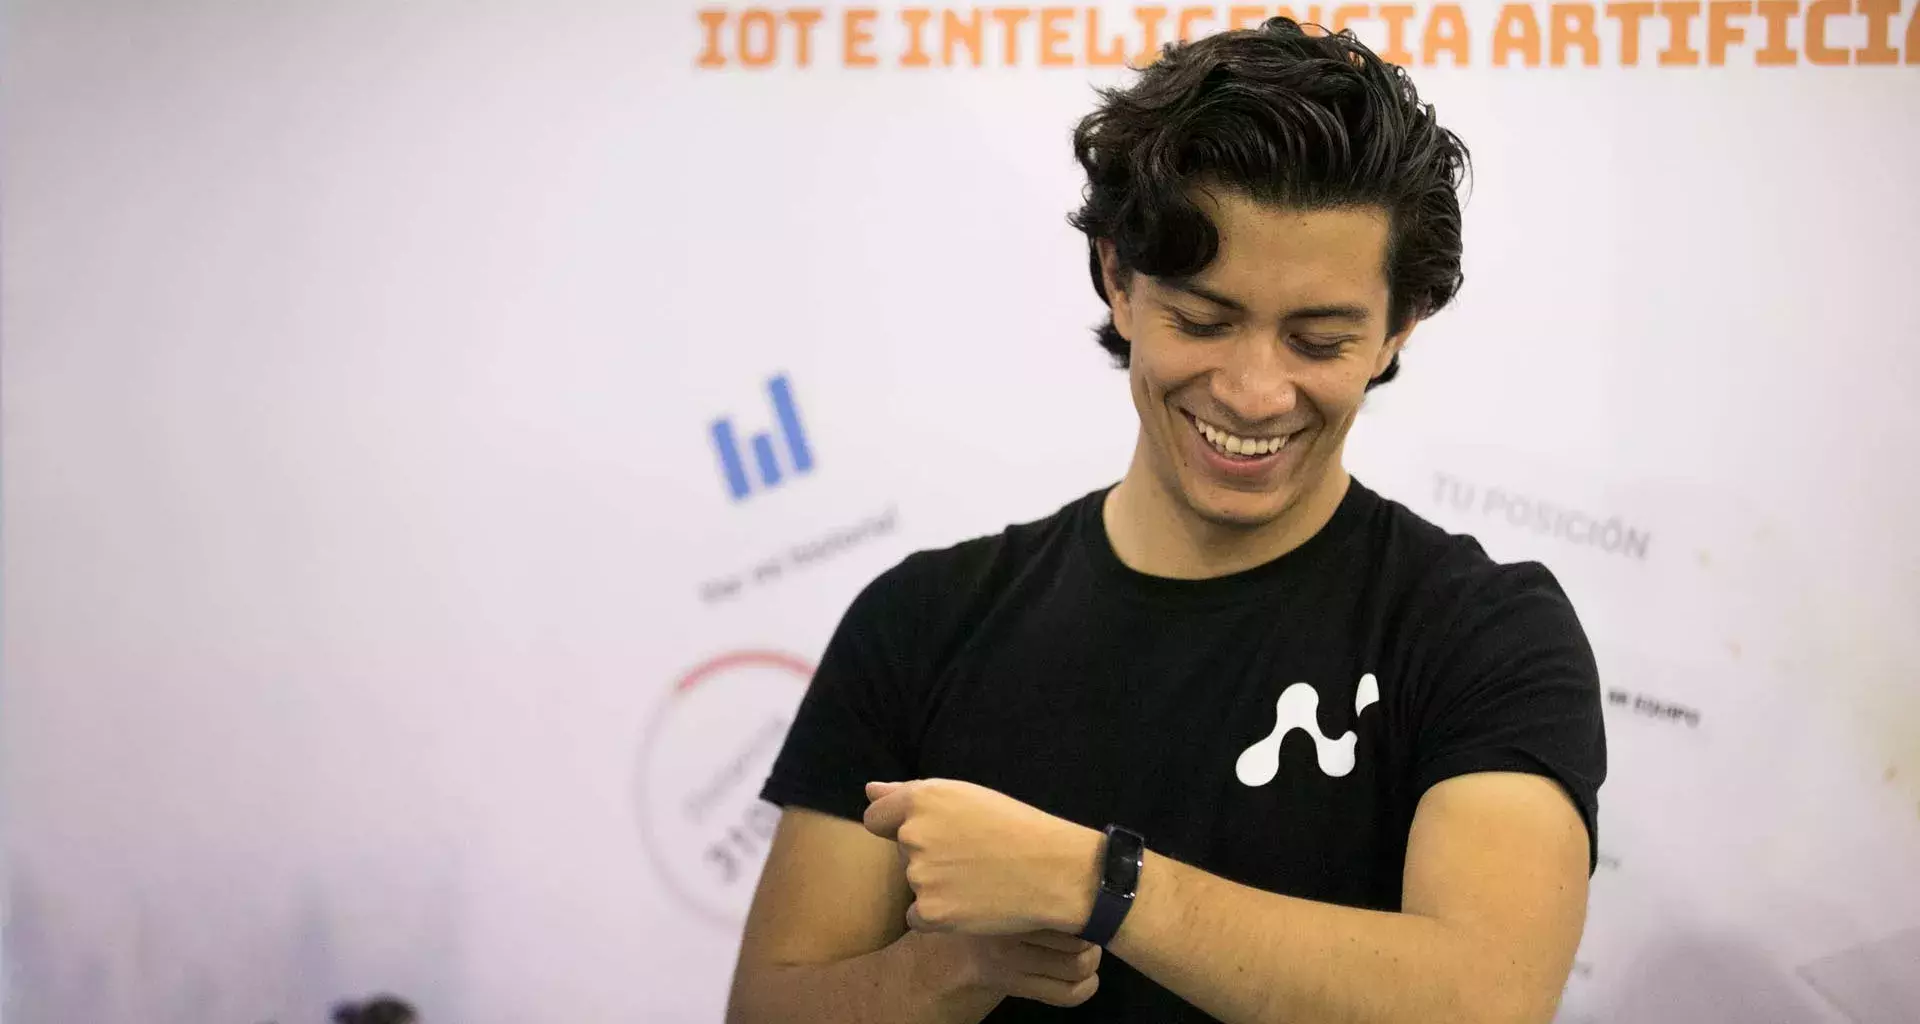 At the age of 22, he’s developing startups based on artificial intelligence